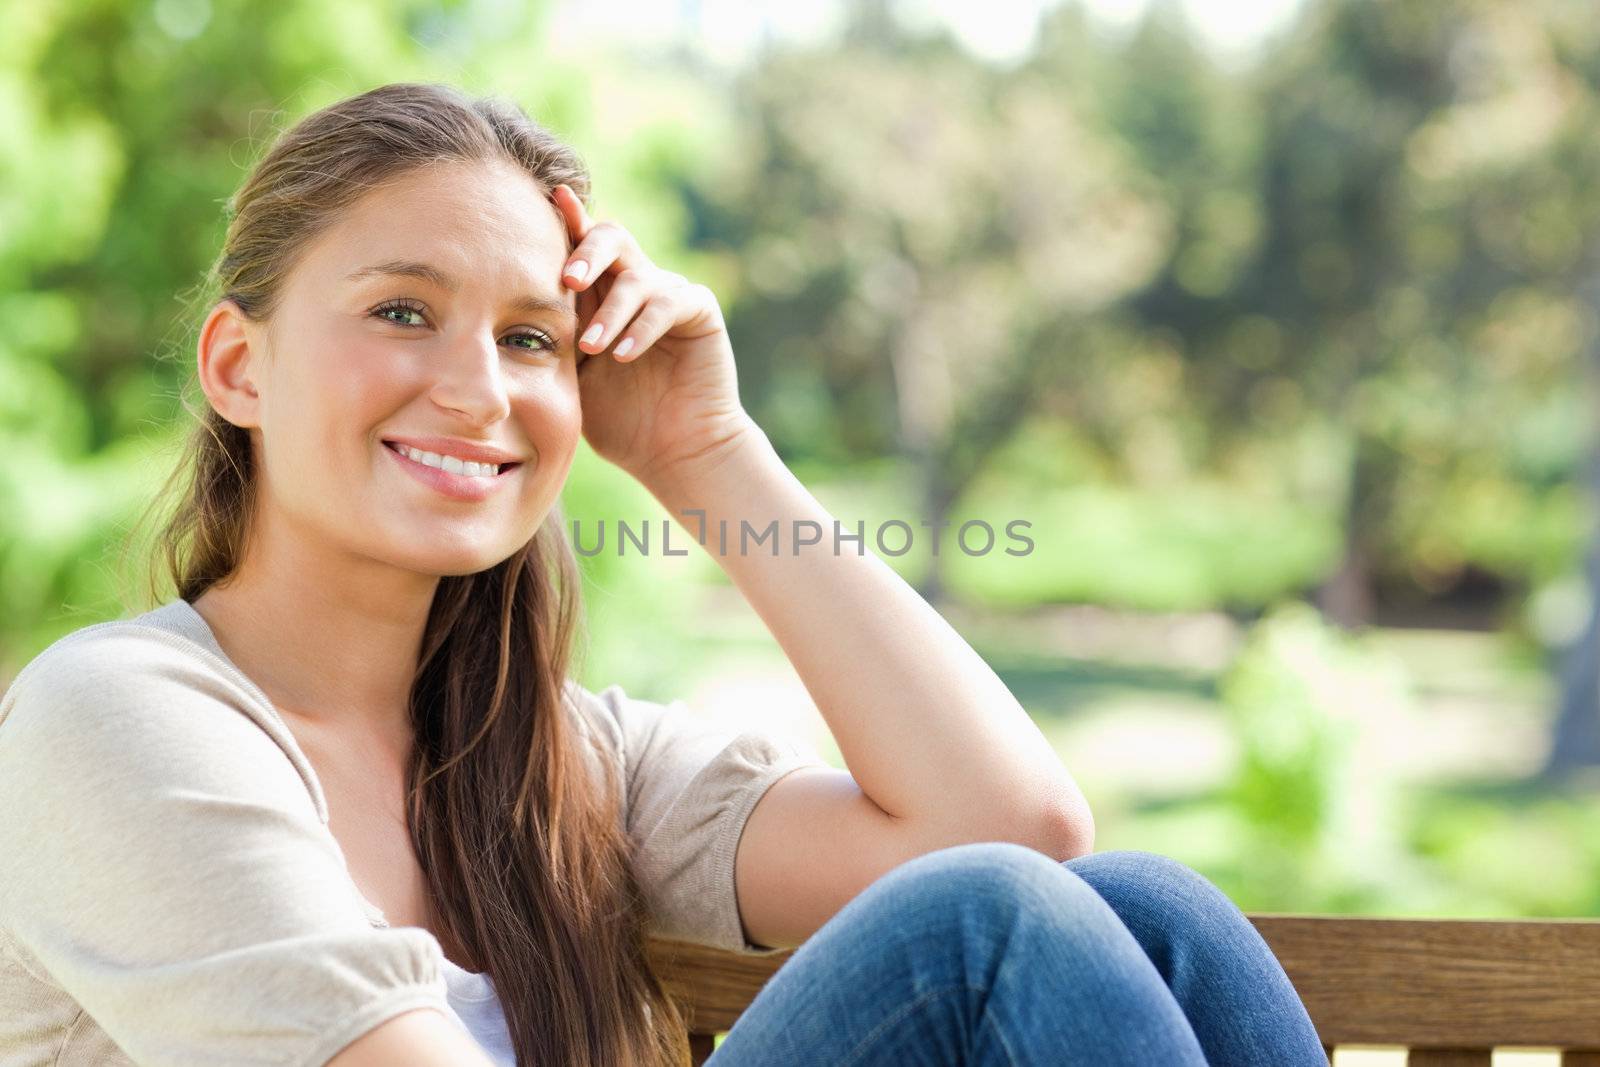 Smiling young woman on a bench in the park